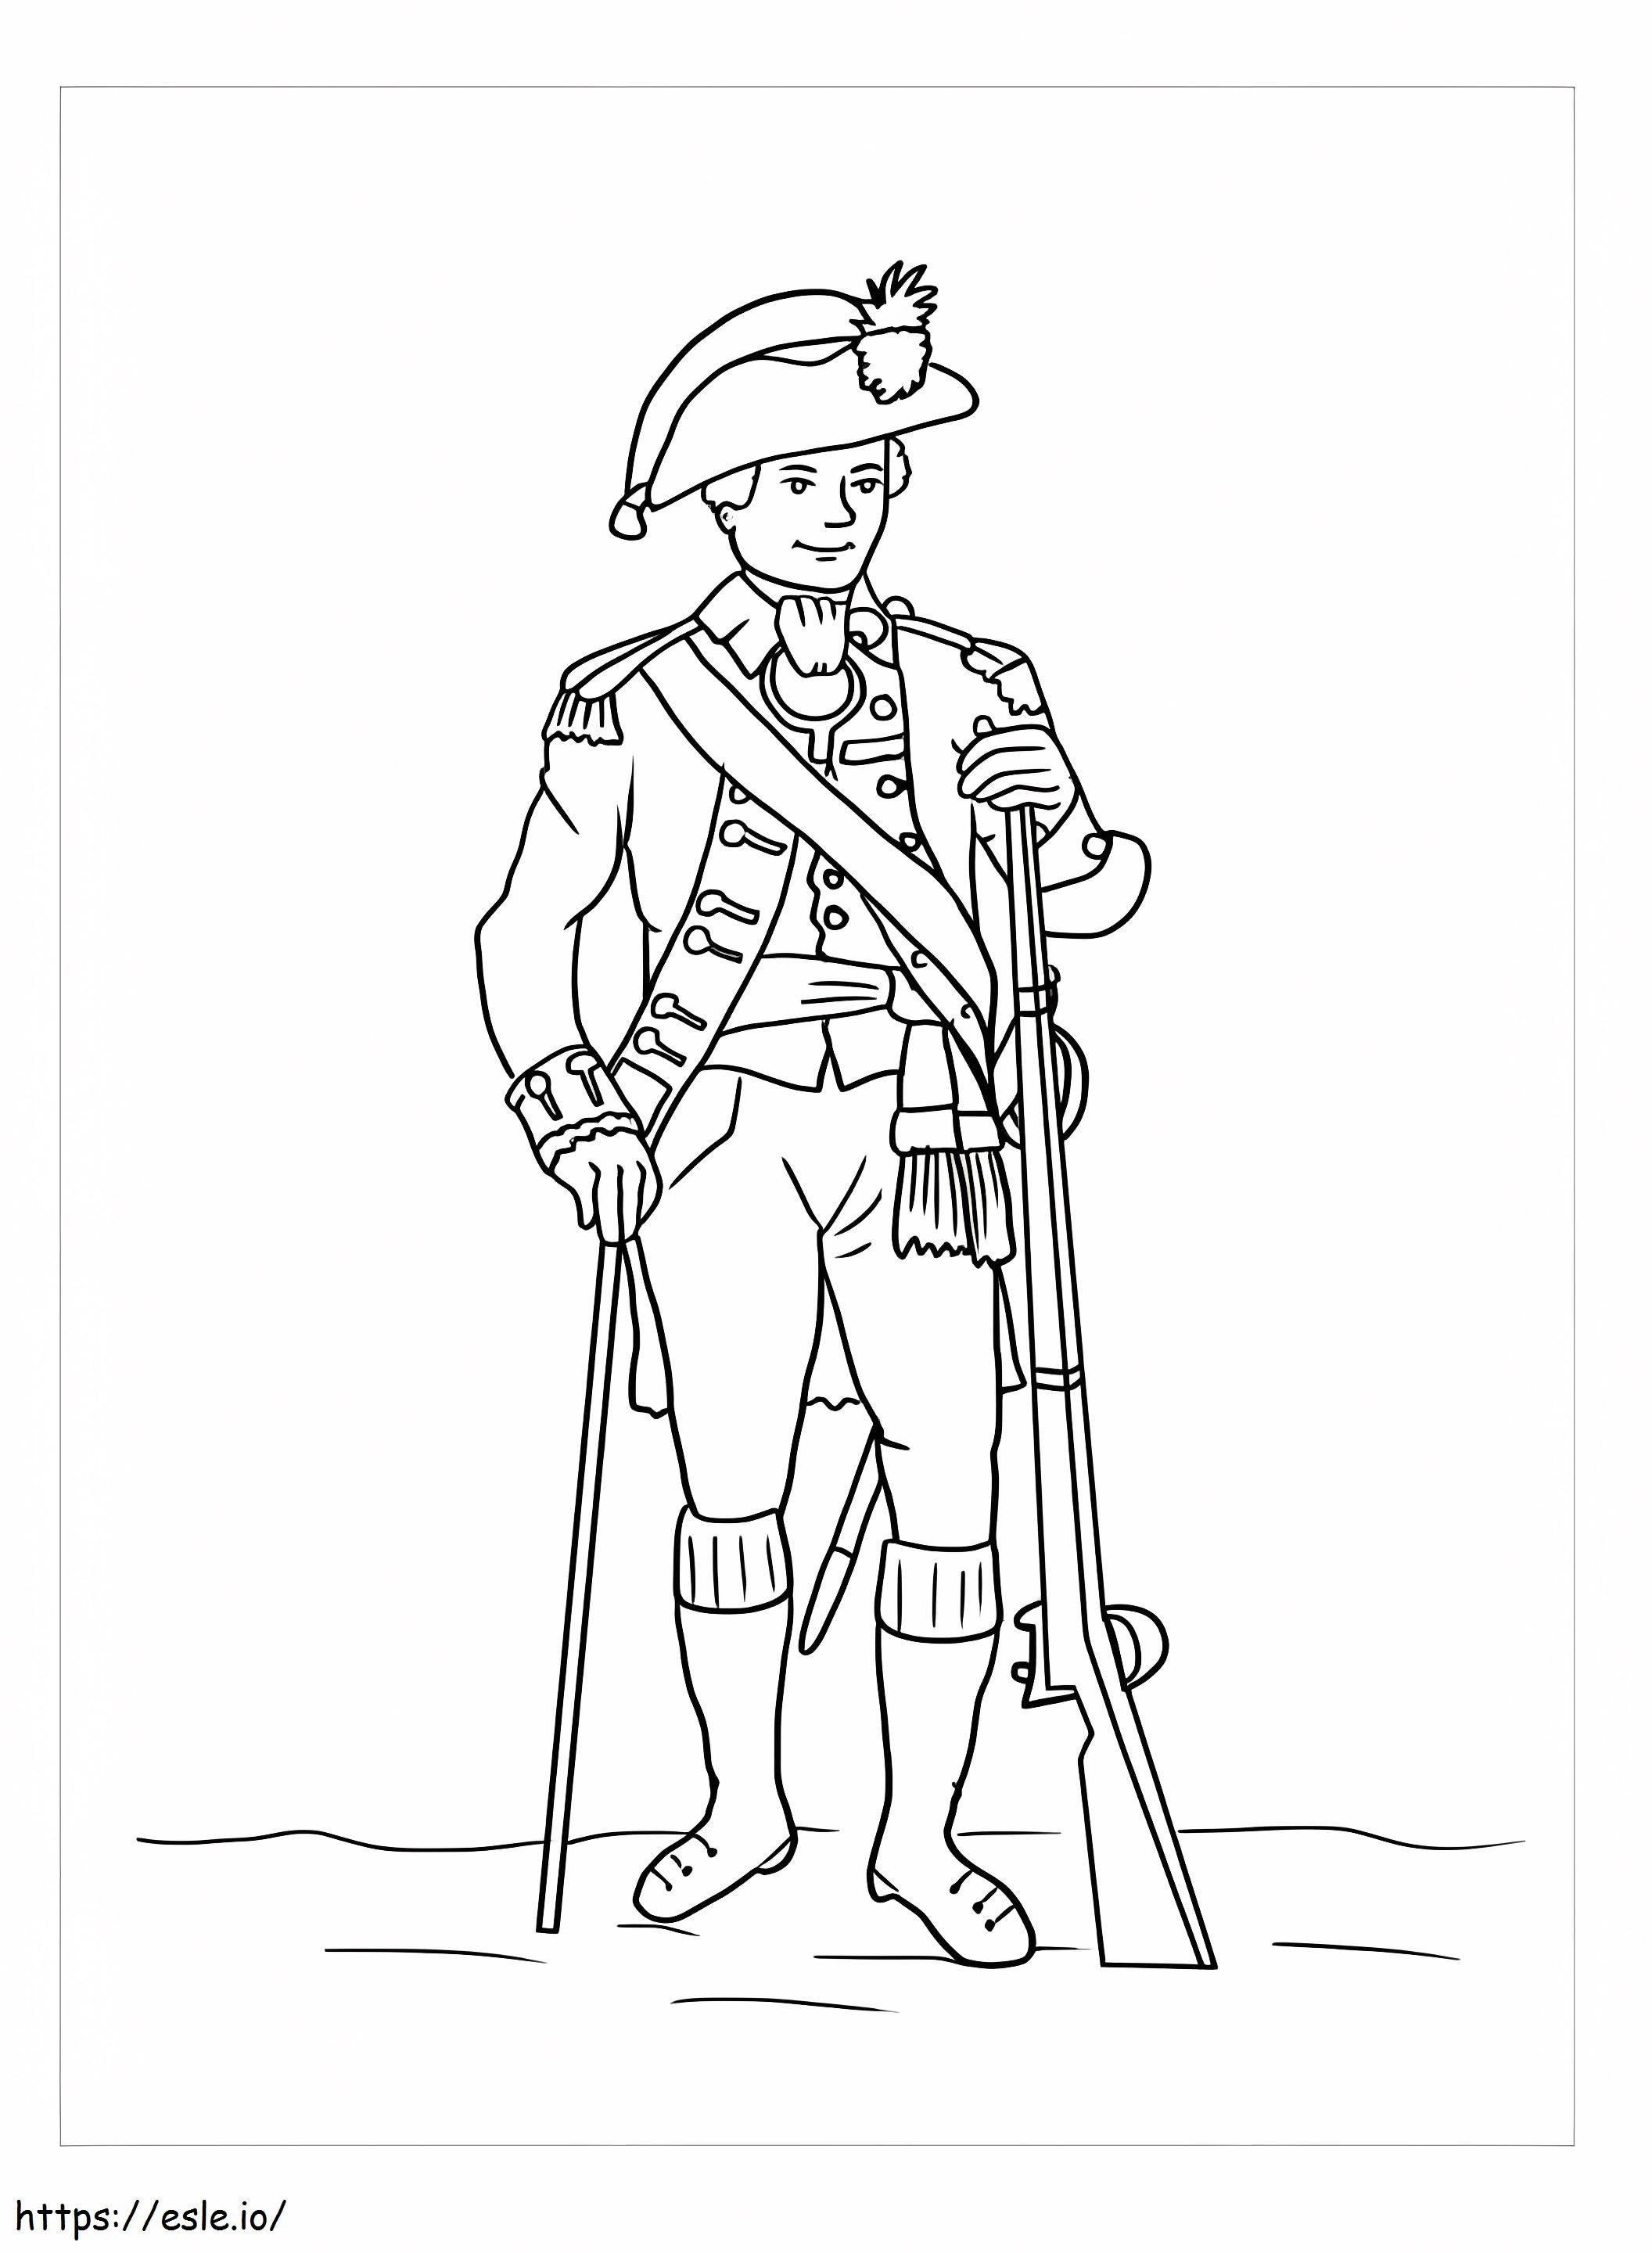 Amazing Soldier coloring page